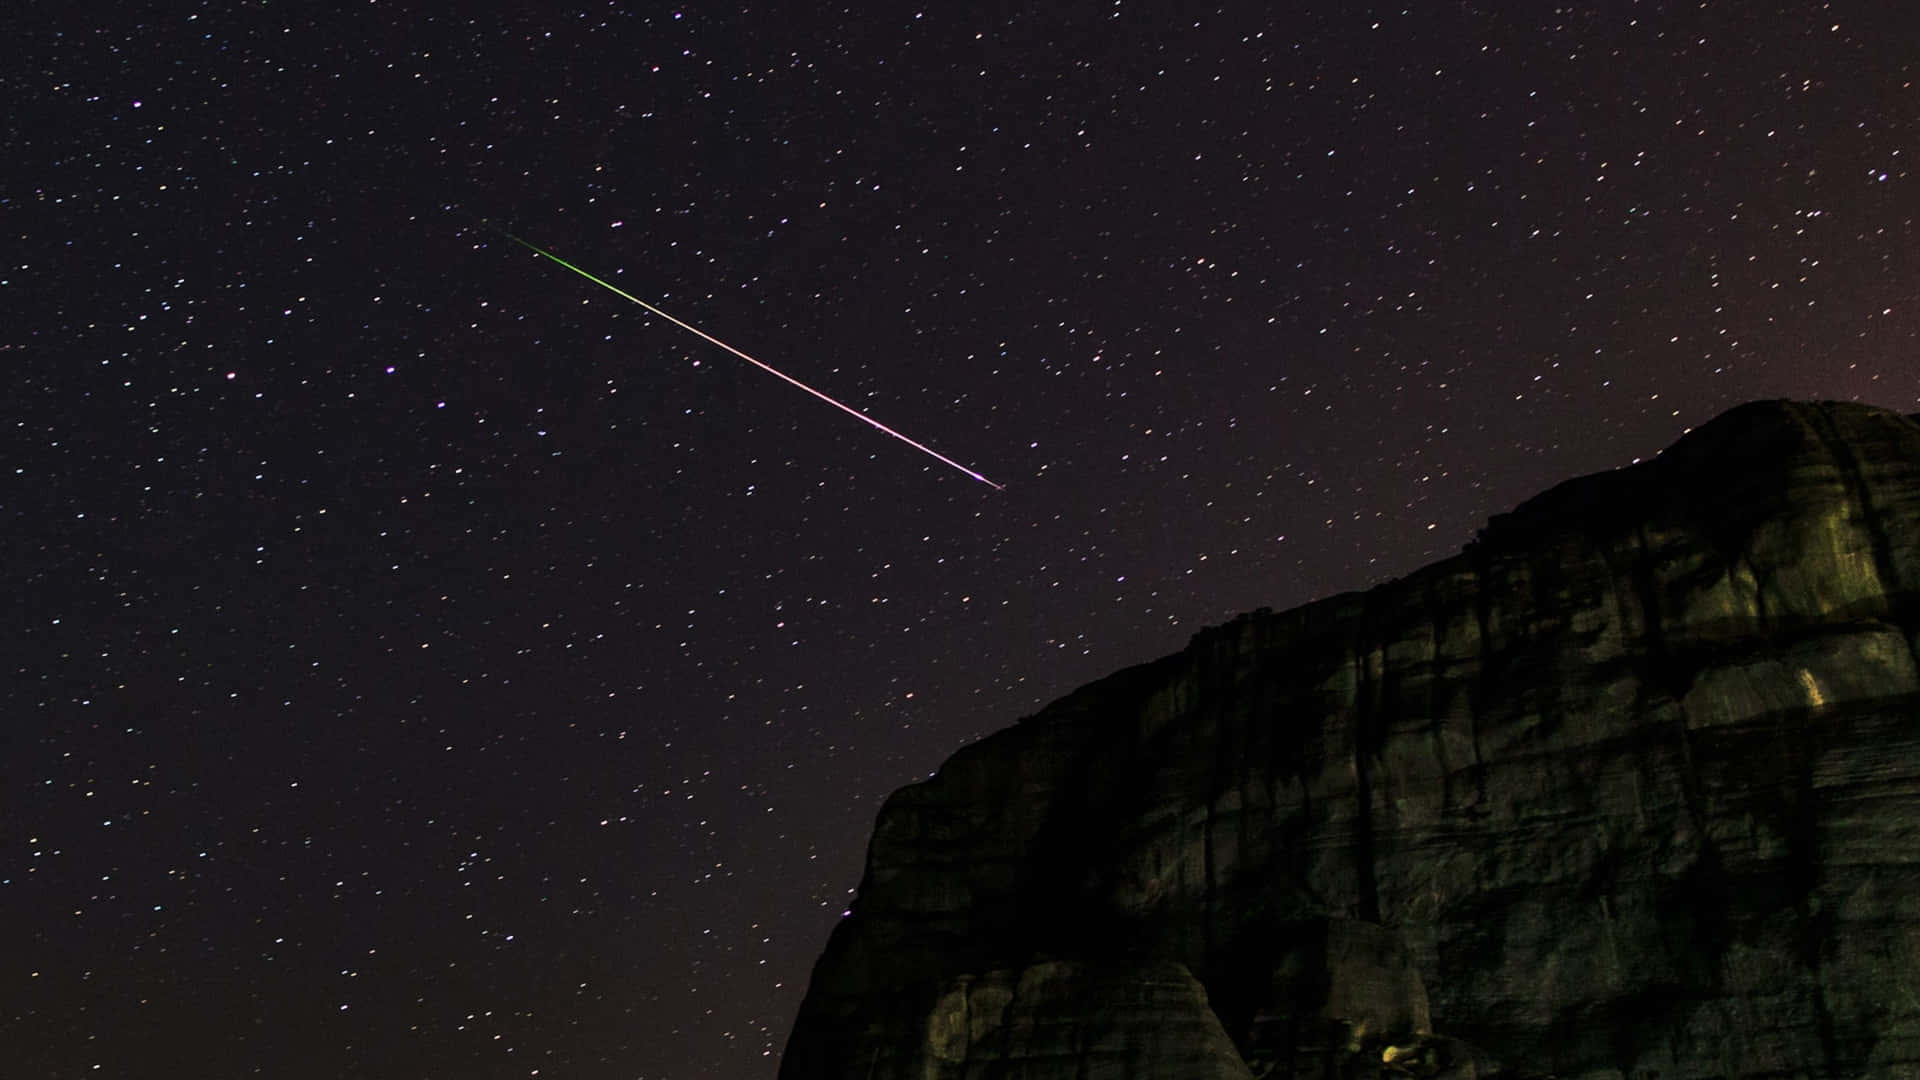 An image of a stunning glowing meteor streaking across the night sky